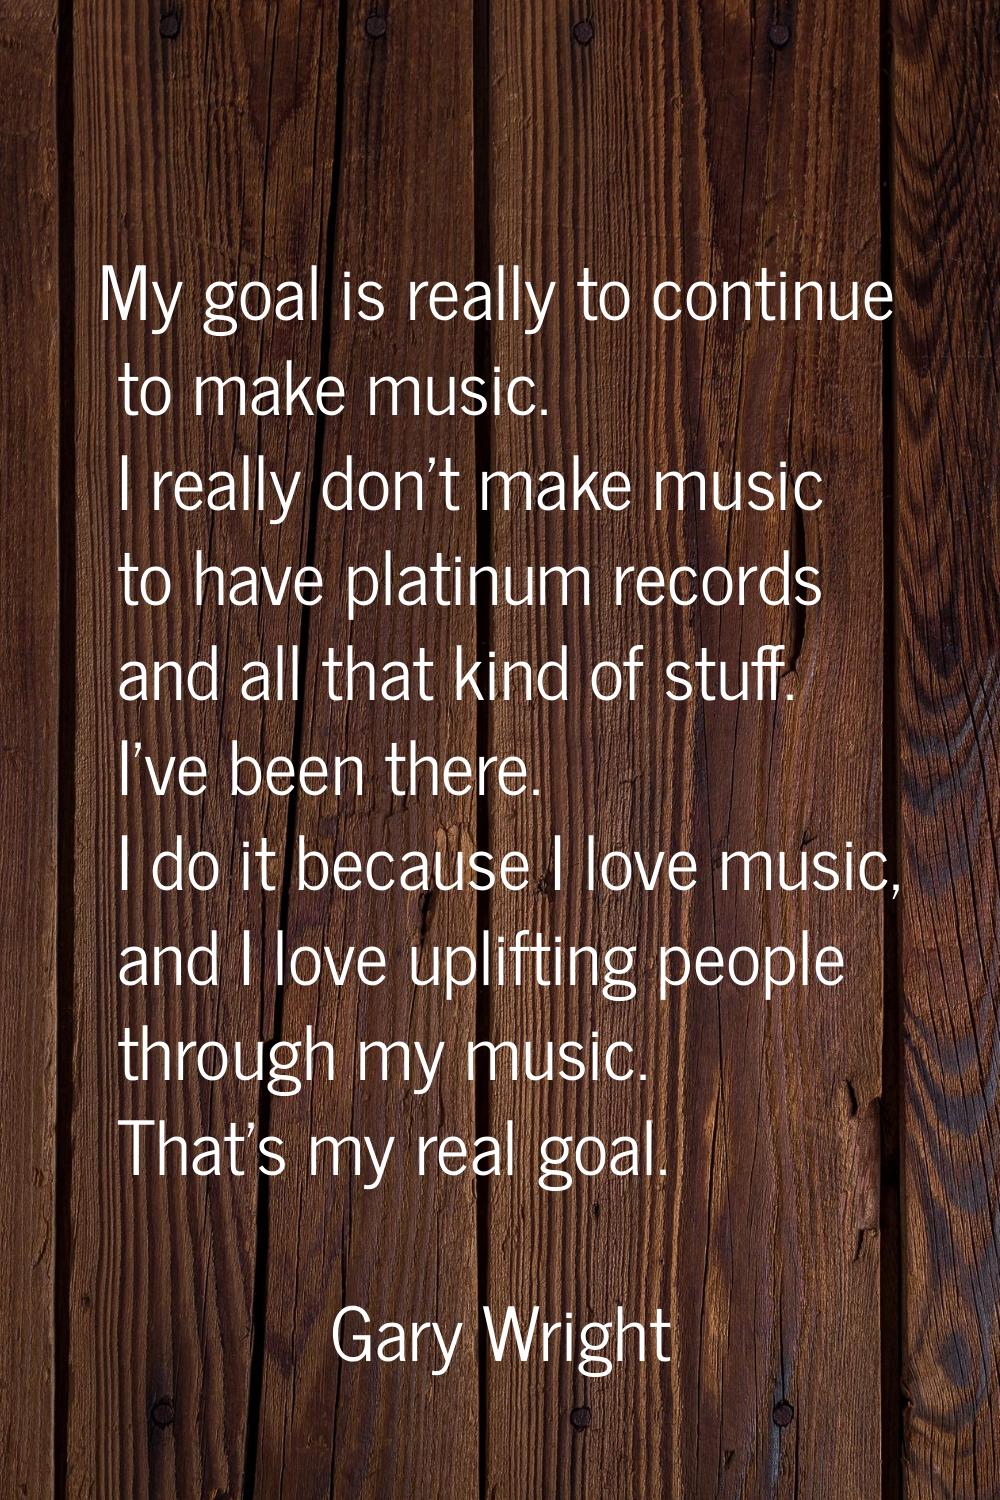 My goal is really to continue to make music. I really don't make music to have platinum records and